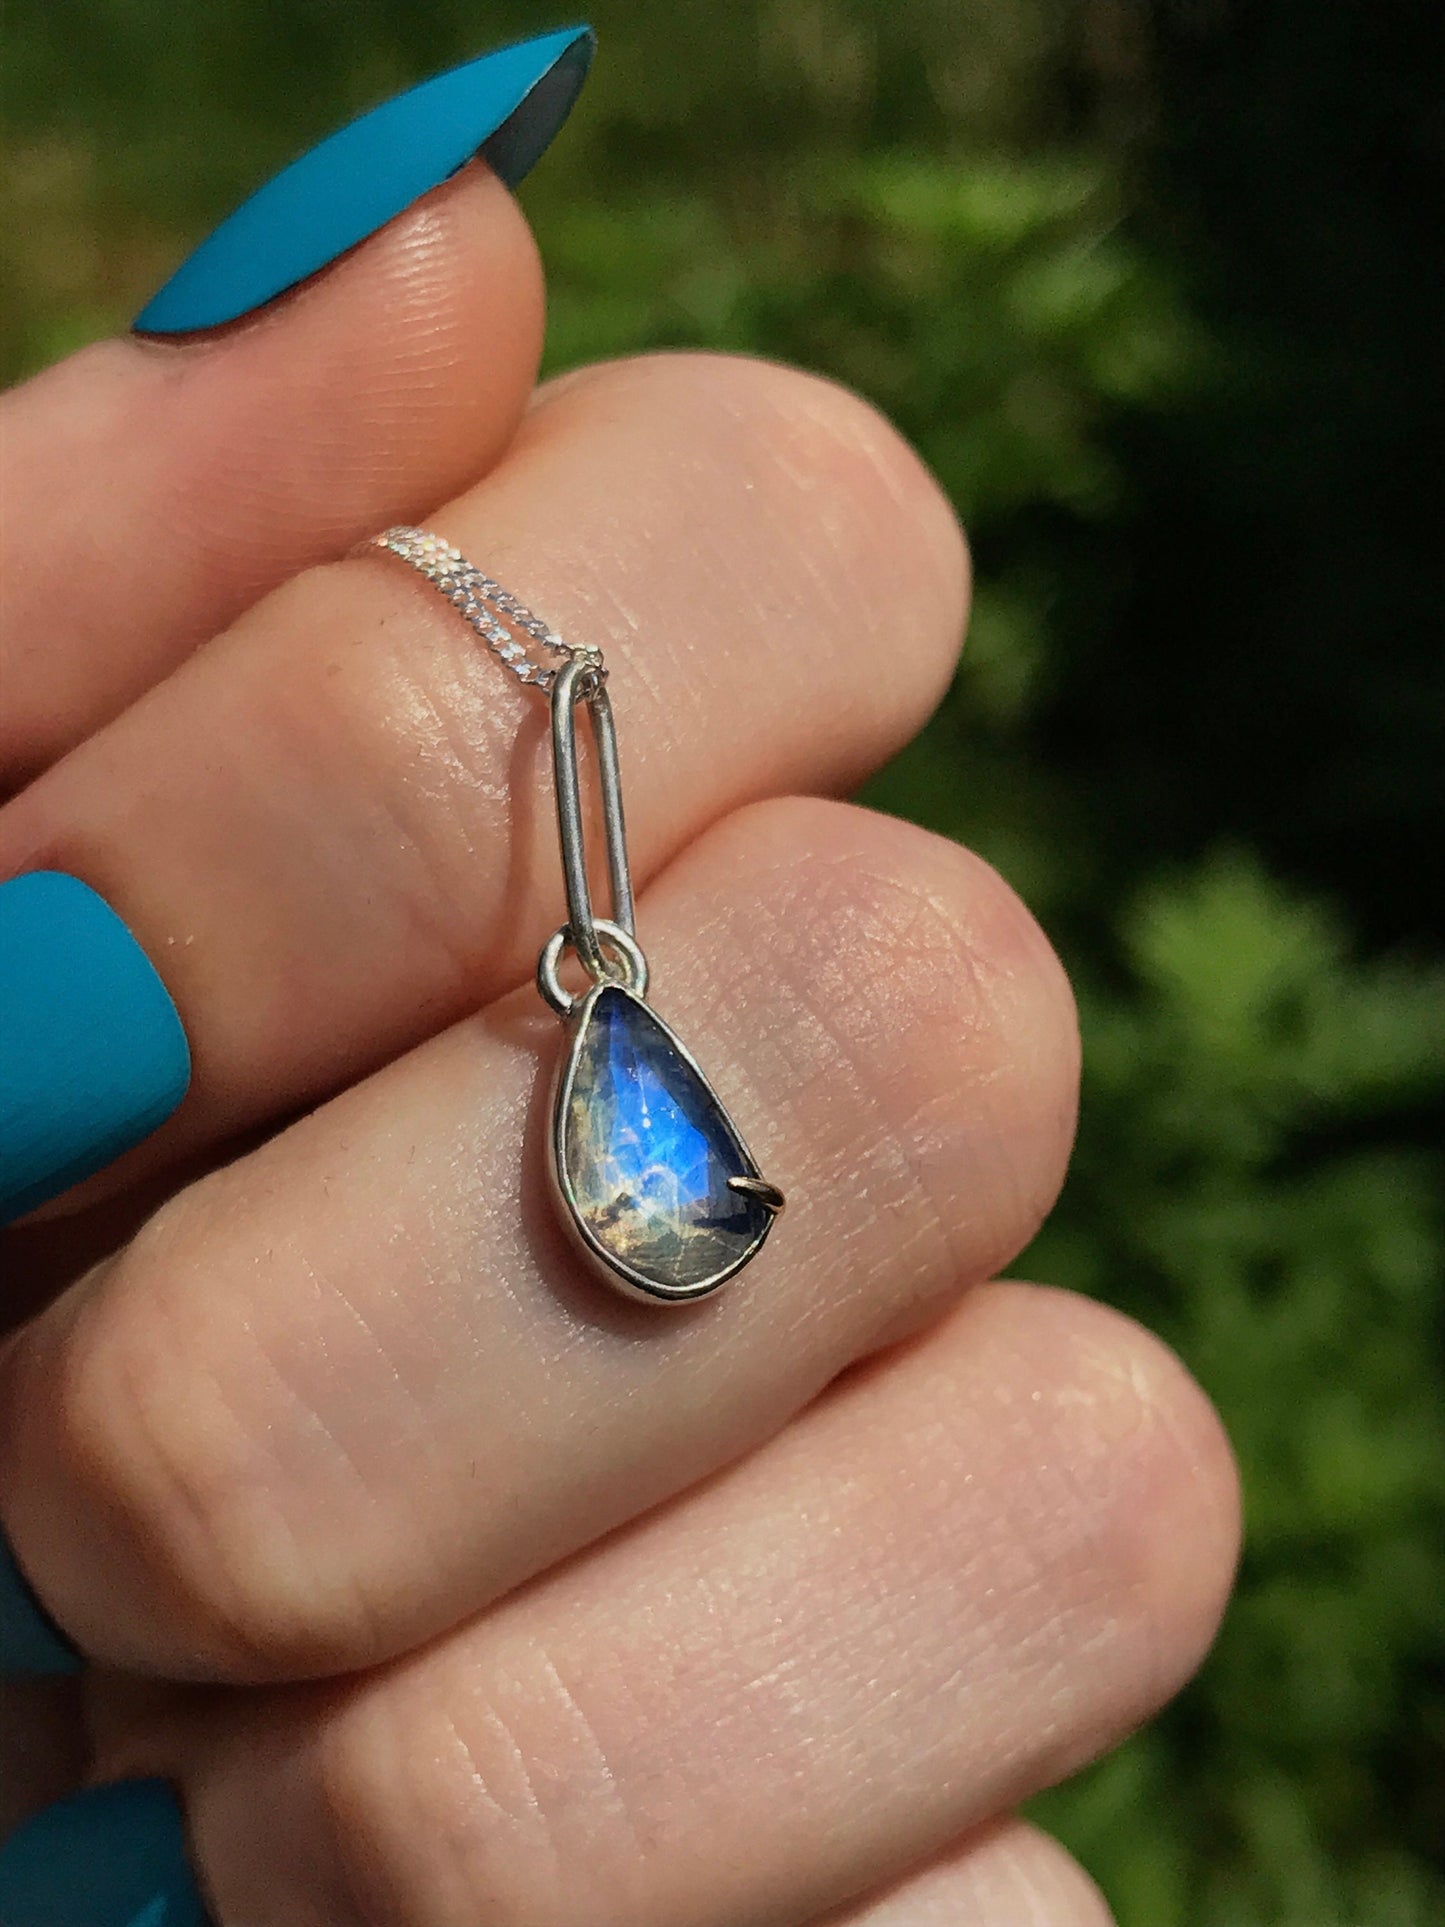 Rainbow Moonstone, 9ct Gold and Sterling Silver Pendant Necklace on Sterling Silver Chain